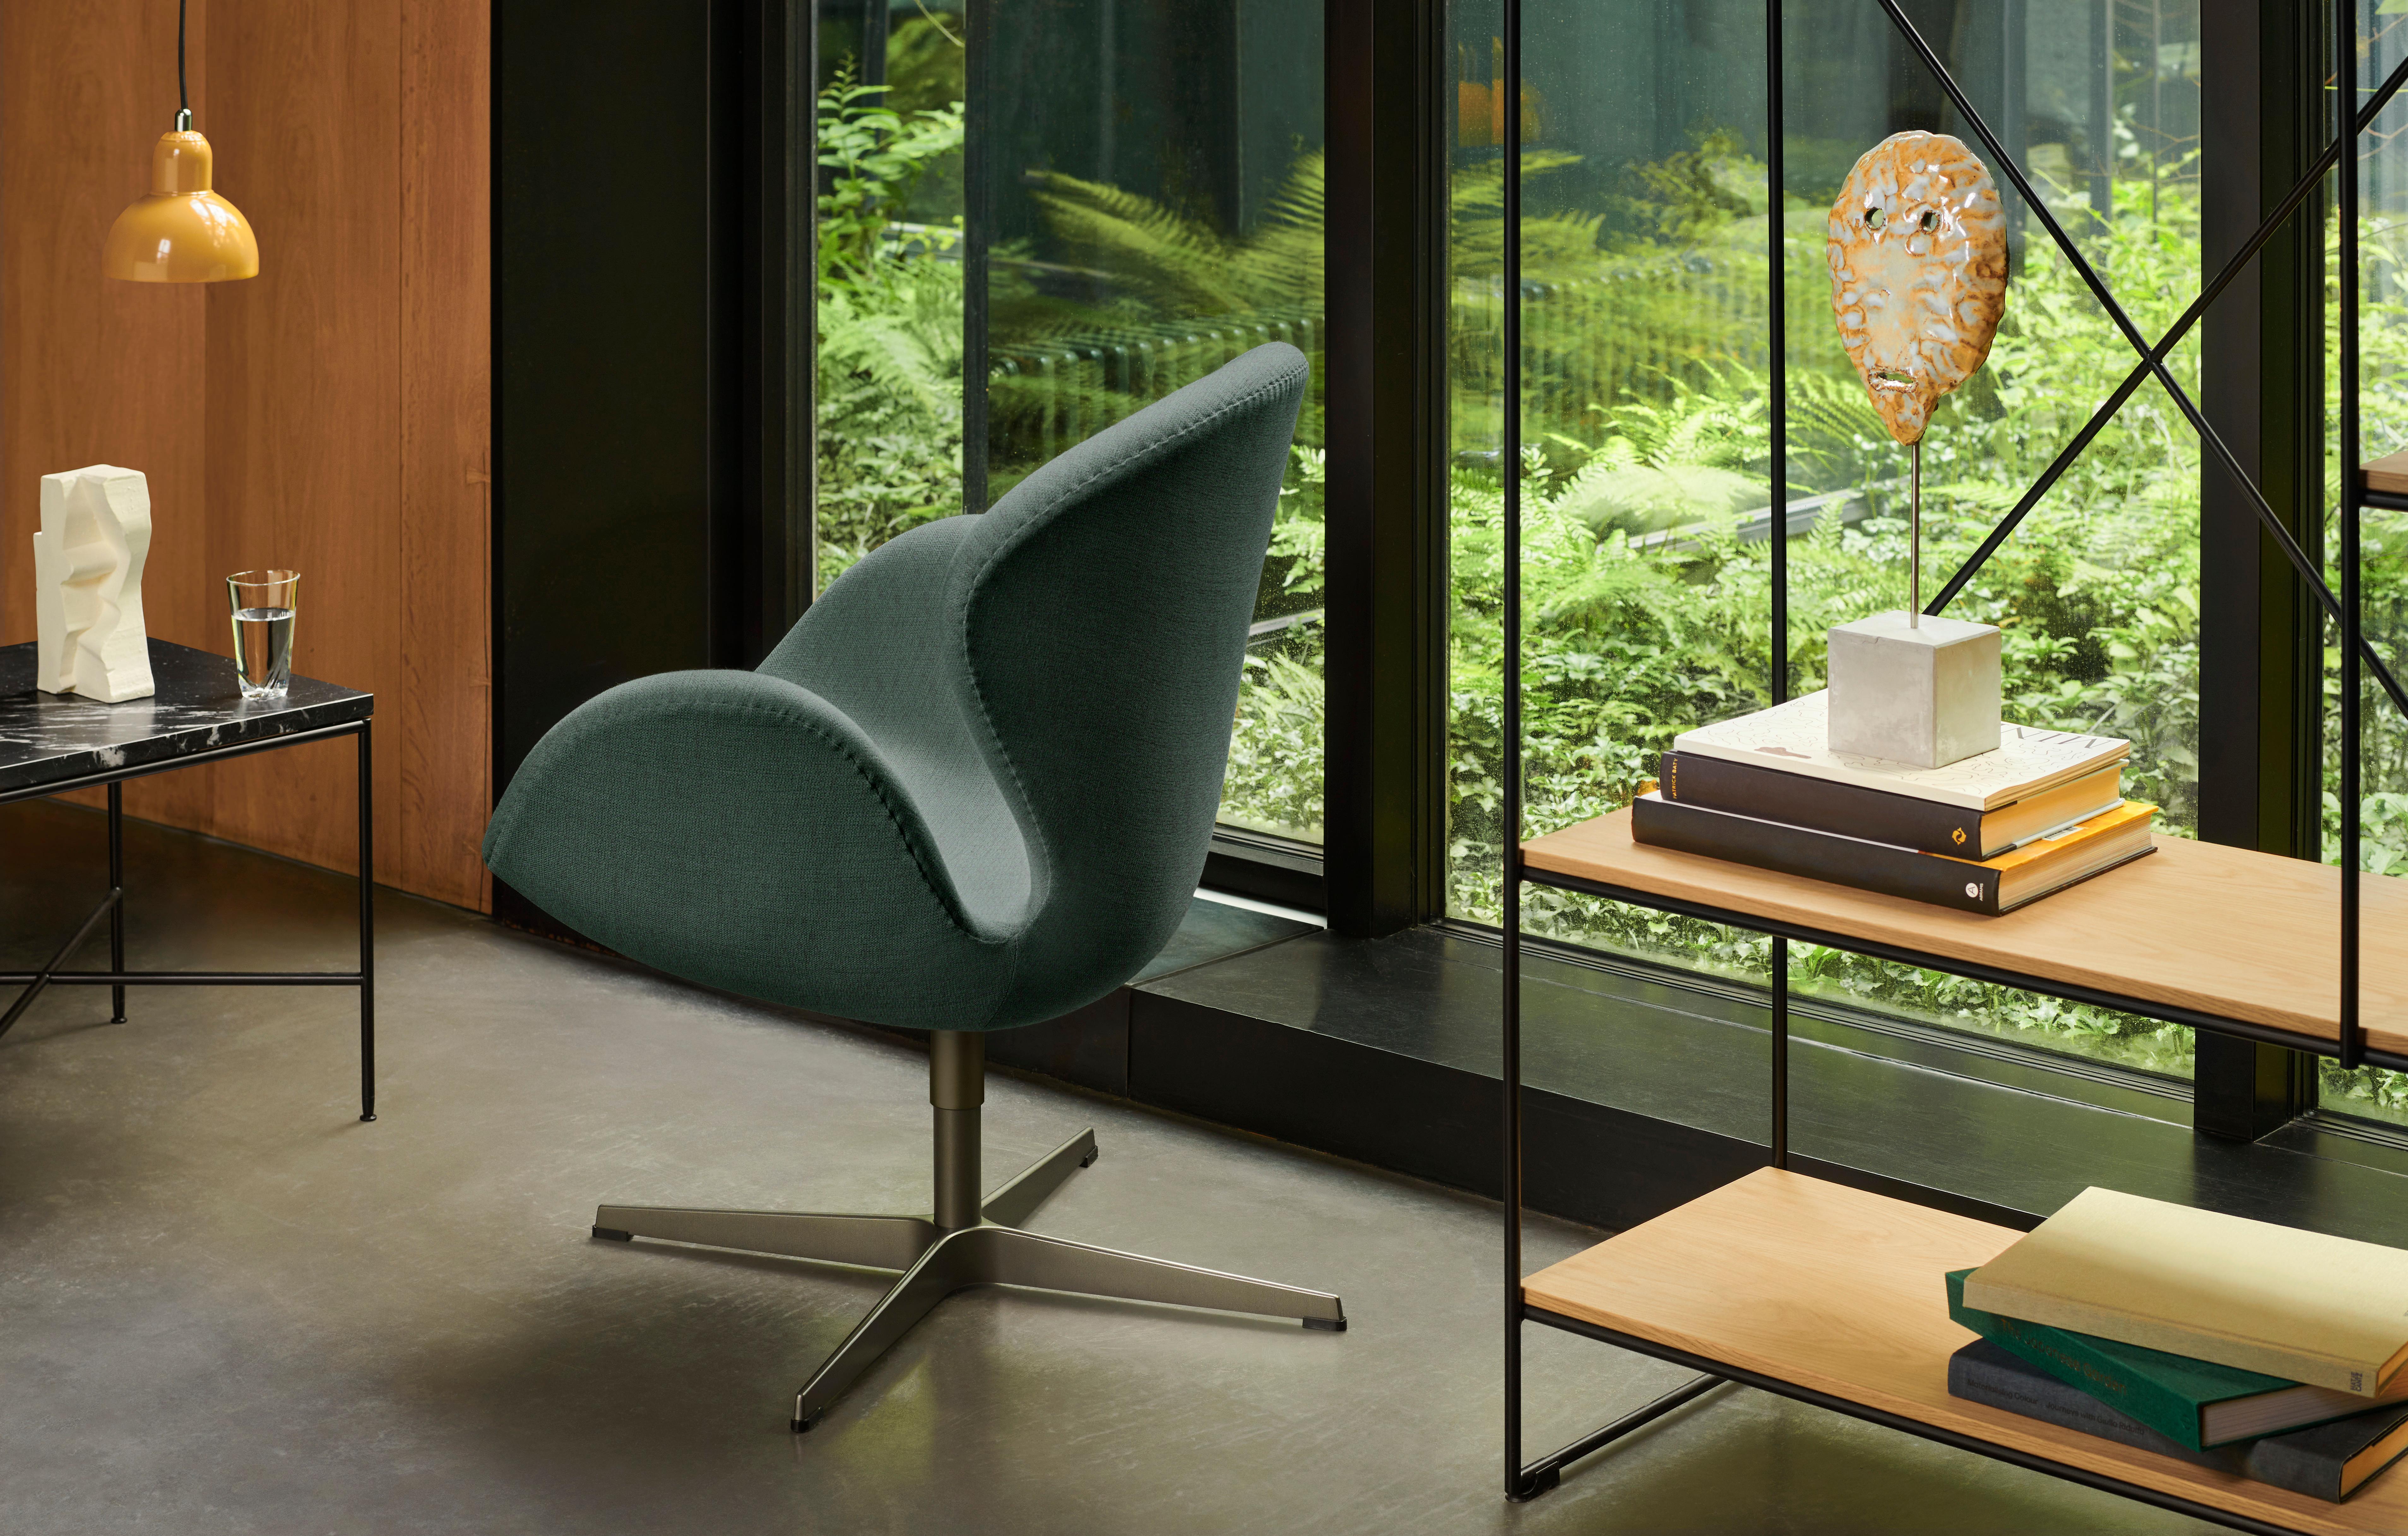 Christian Dell 'Kaiser Idell 6722-P' Pendant for Fritz Hansen in Soft Ochre.

 Established in 1872, Fritz Hansen has become synonymous with legendary Danish design. Combining timeless craftsmanship with an emphasis on sustainability, the brand’s